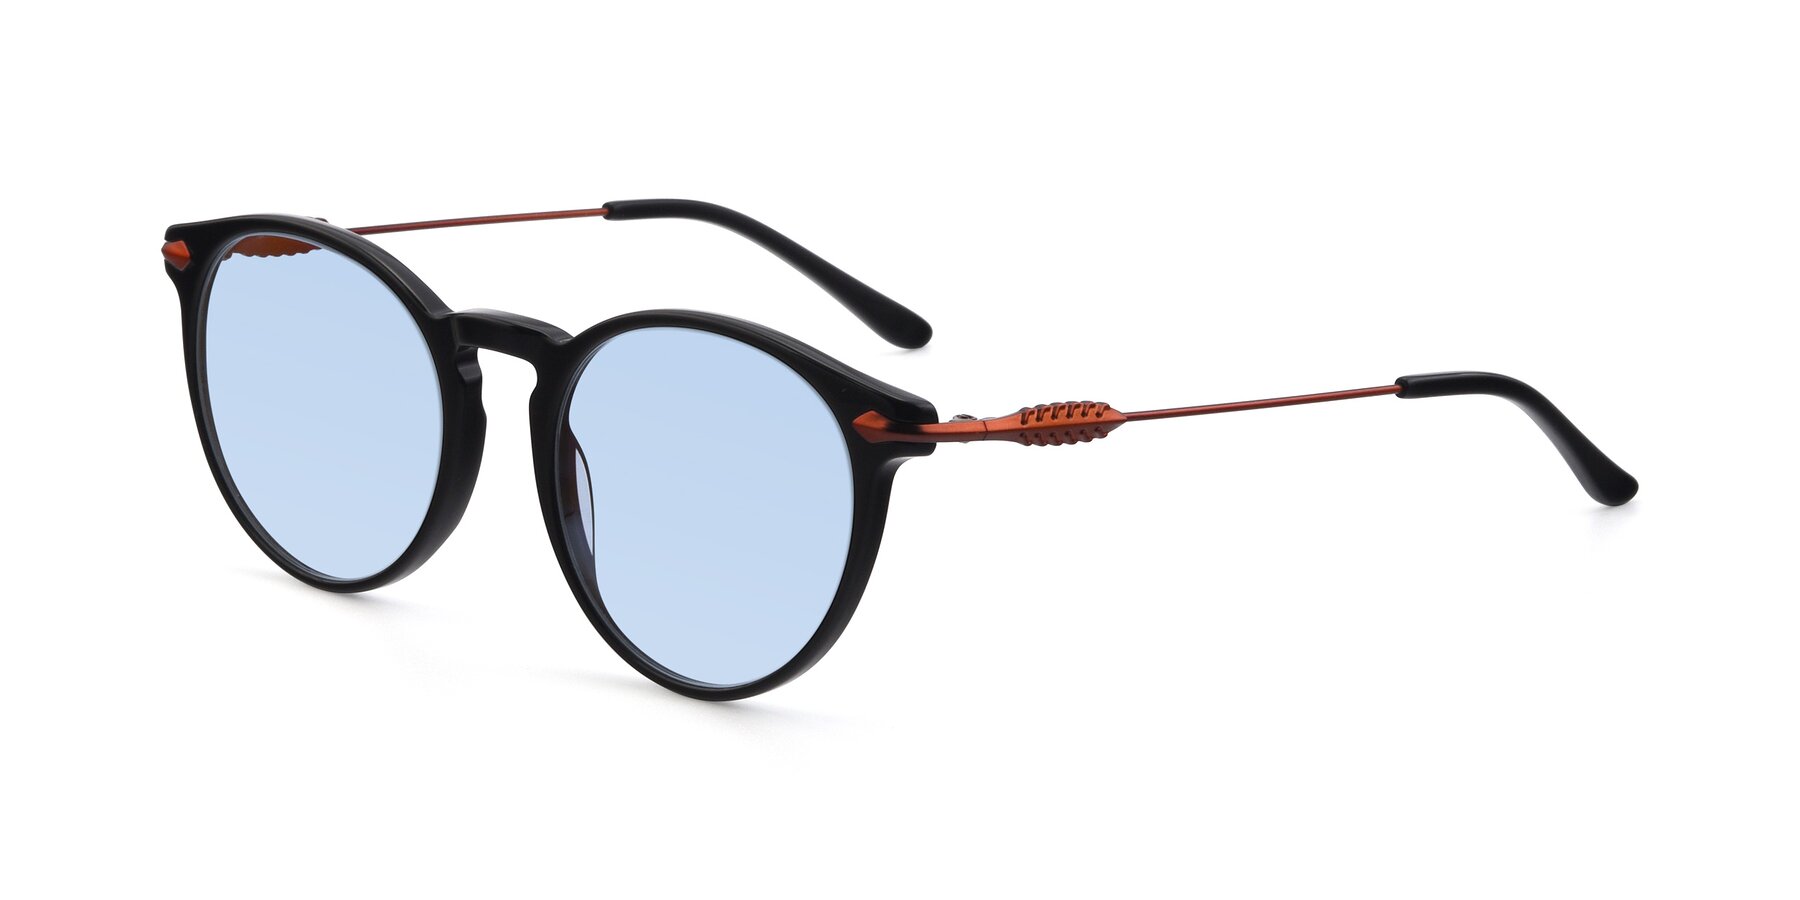 Angle of 17660 in Black with Light Blue Tinted Lenses